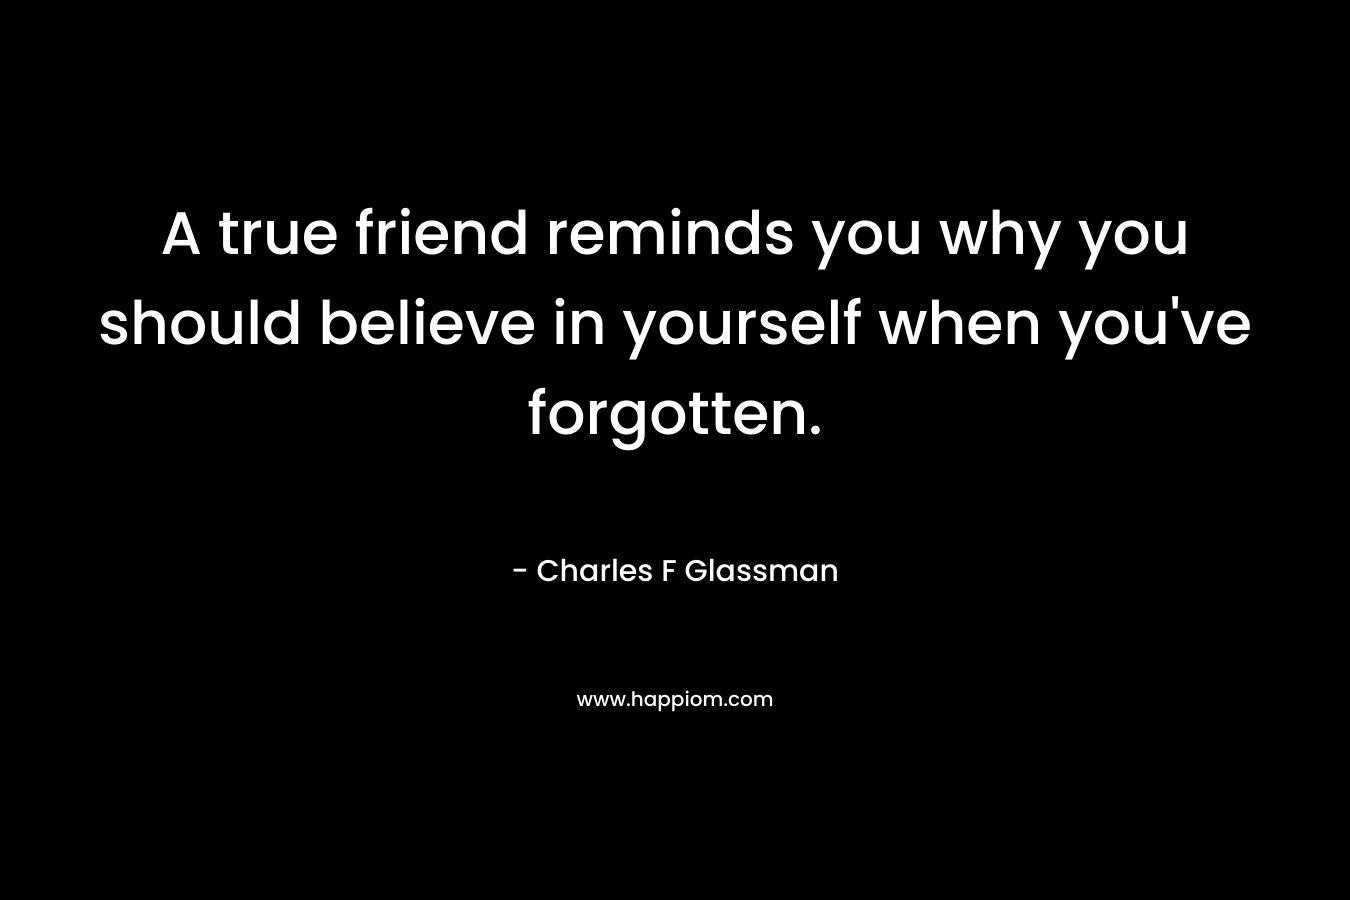 A true friend reminds you why you should believe in yourself when you’ve forgotten. – Charles F Glassman